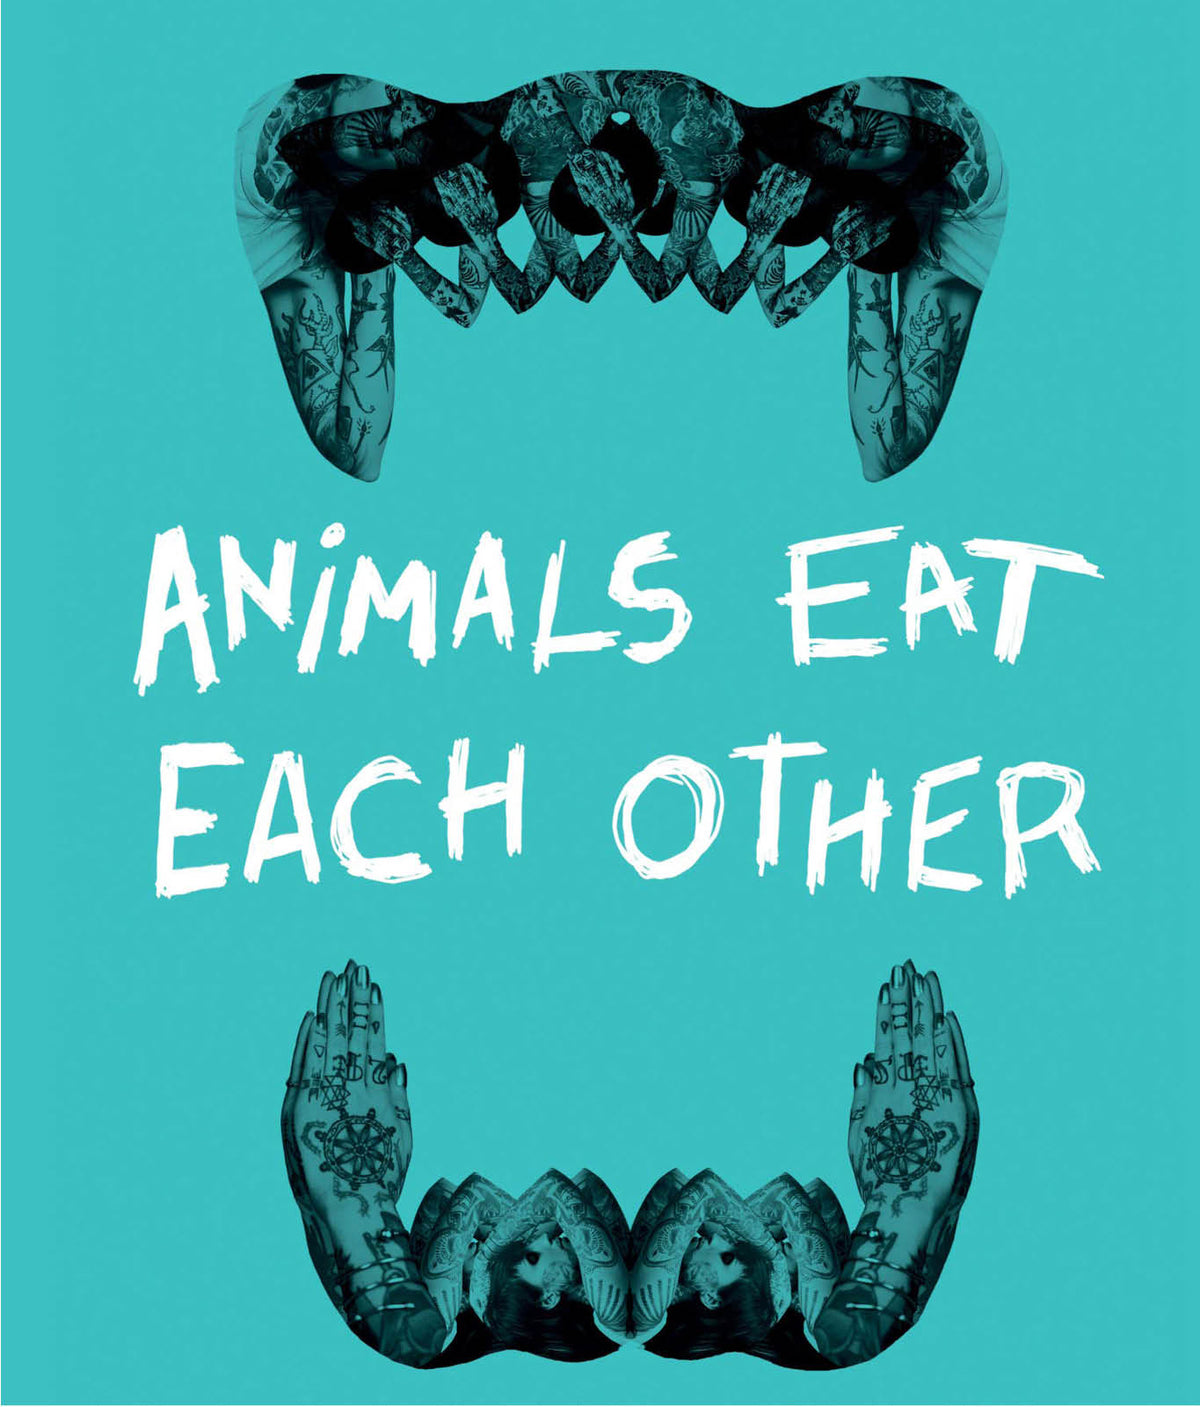 Animals Eat Each Other by Elle Nash